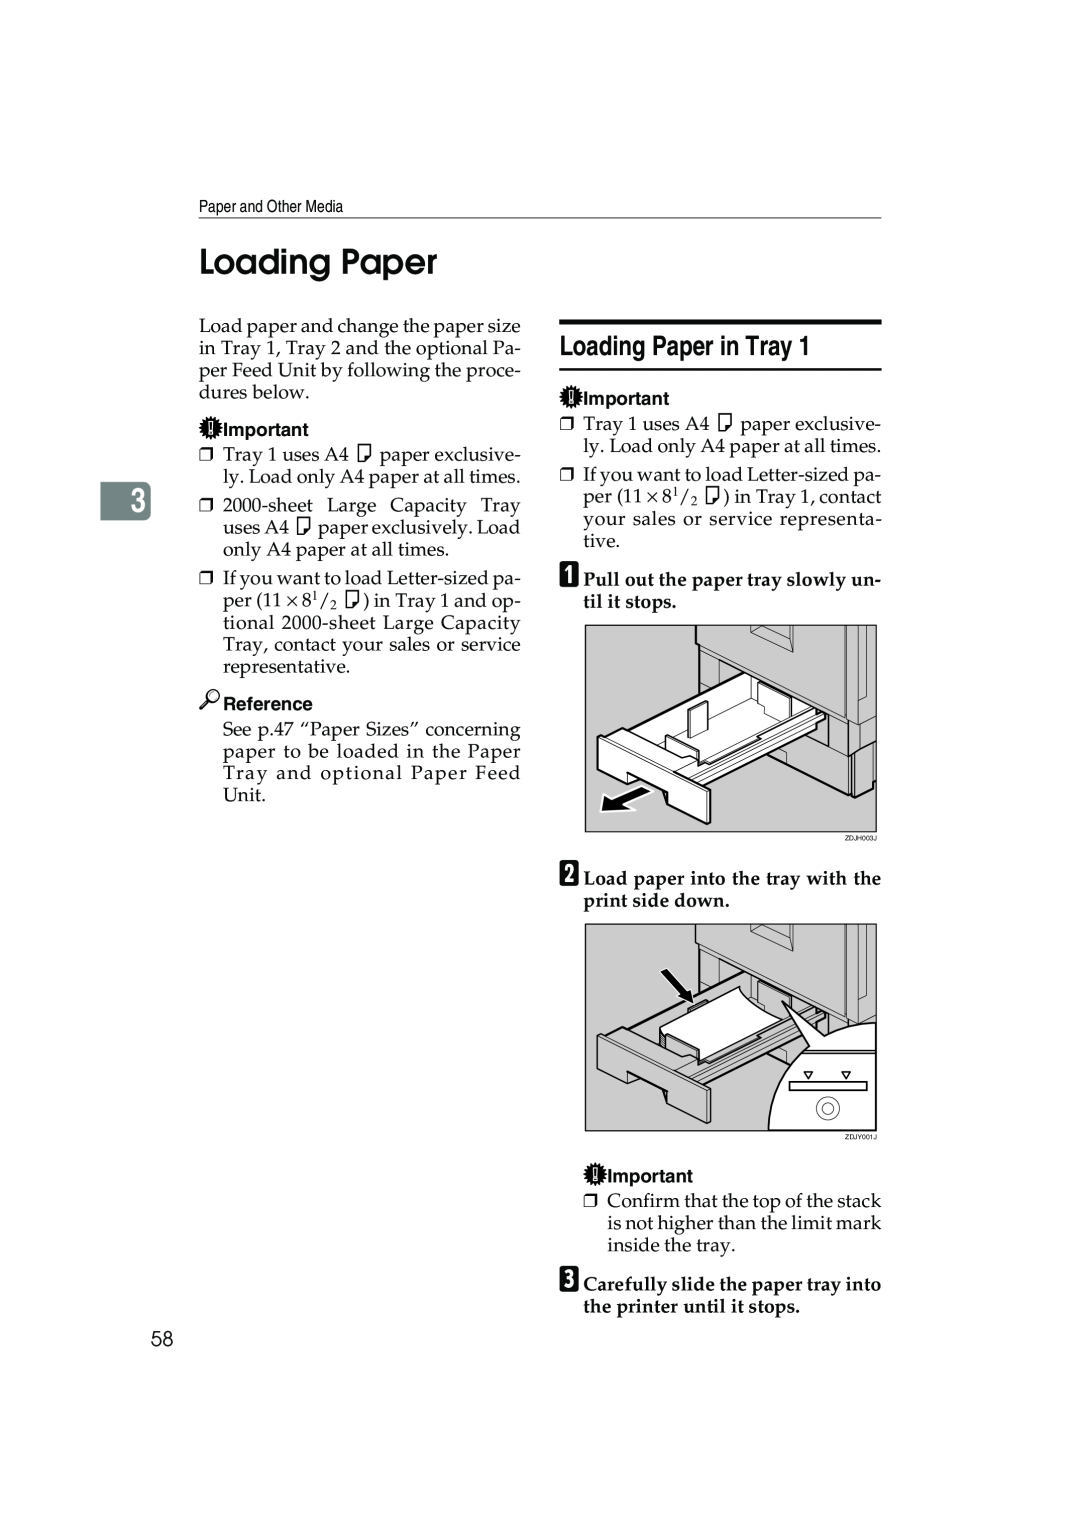 Ricoh AP3800C operating instructions Loading Paper in Tray 